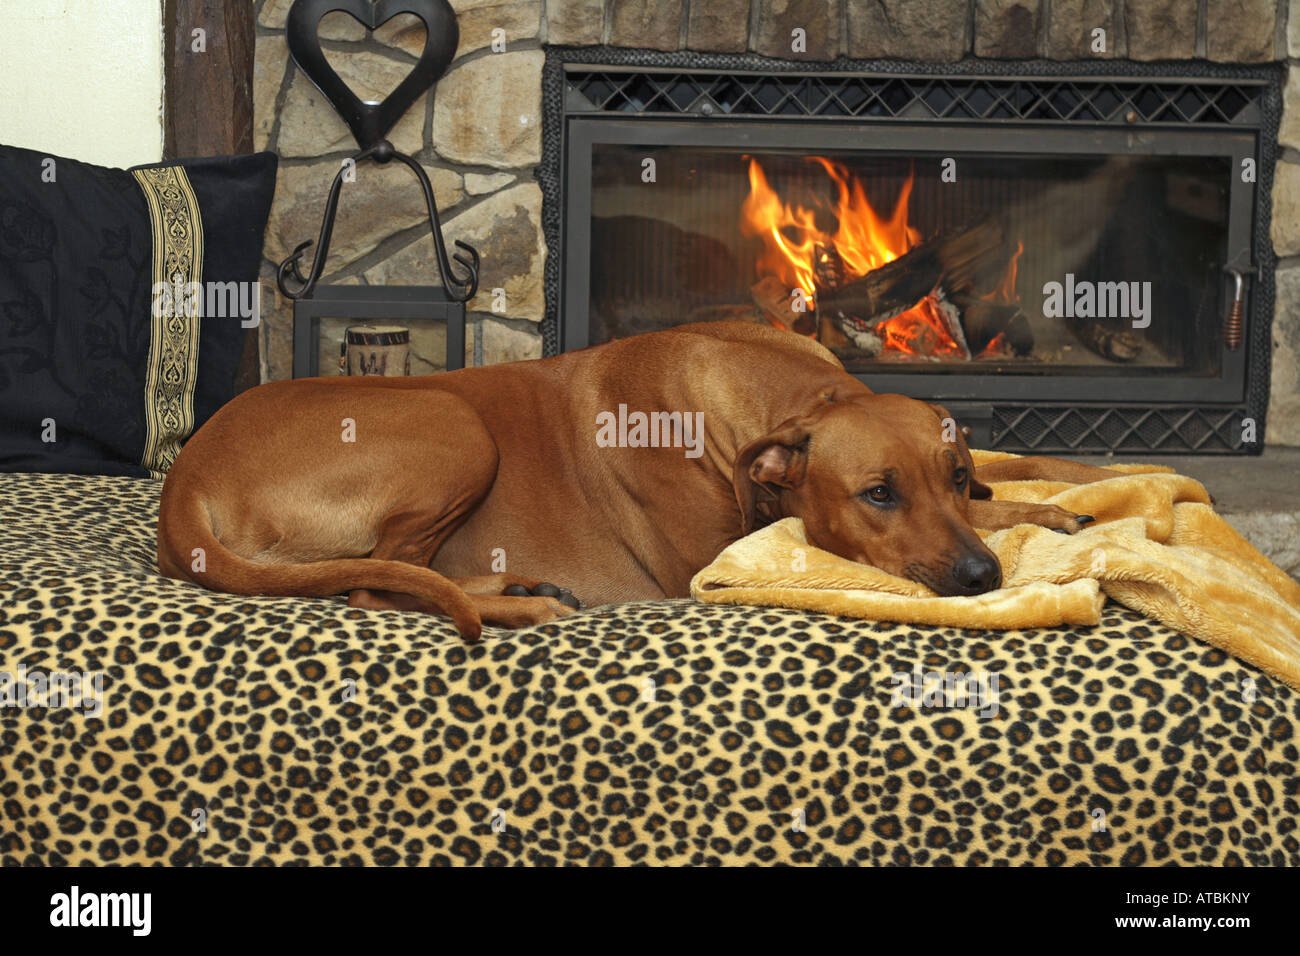 Rhodesian Ridgeback (Canis lupus f. familiaris), lying on sofa in front of a fireside Stock Photo